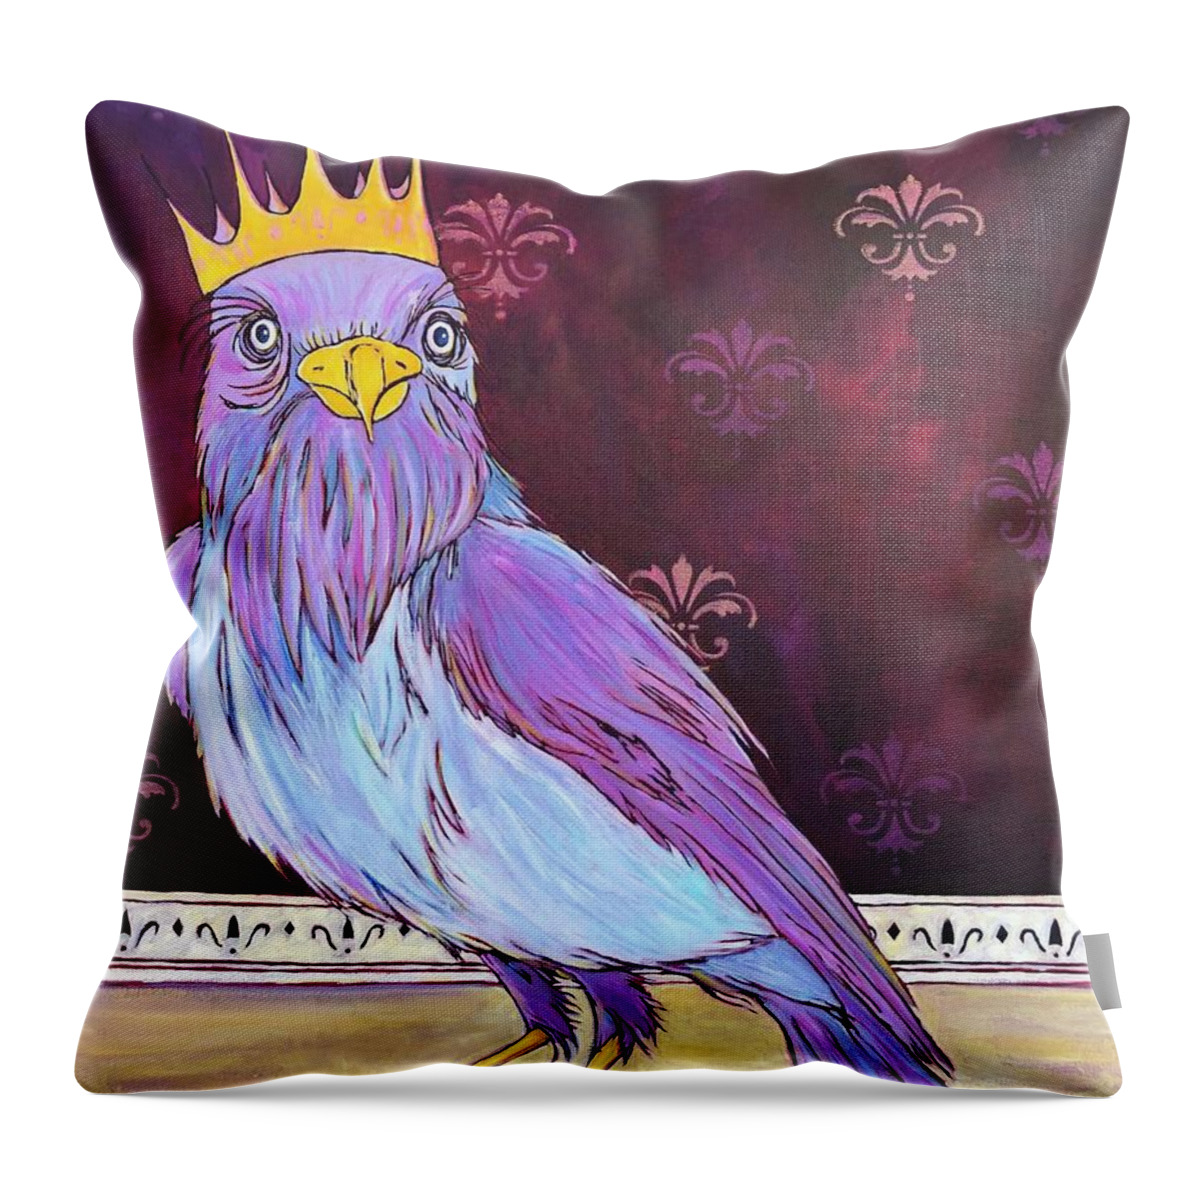  Throw Pillow featuring the painting Fisher King by Kelly Smith-Price